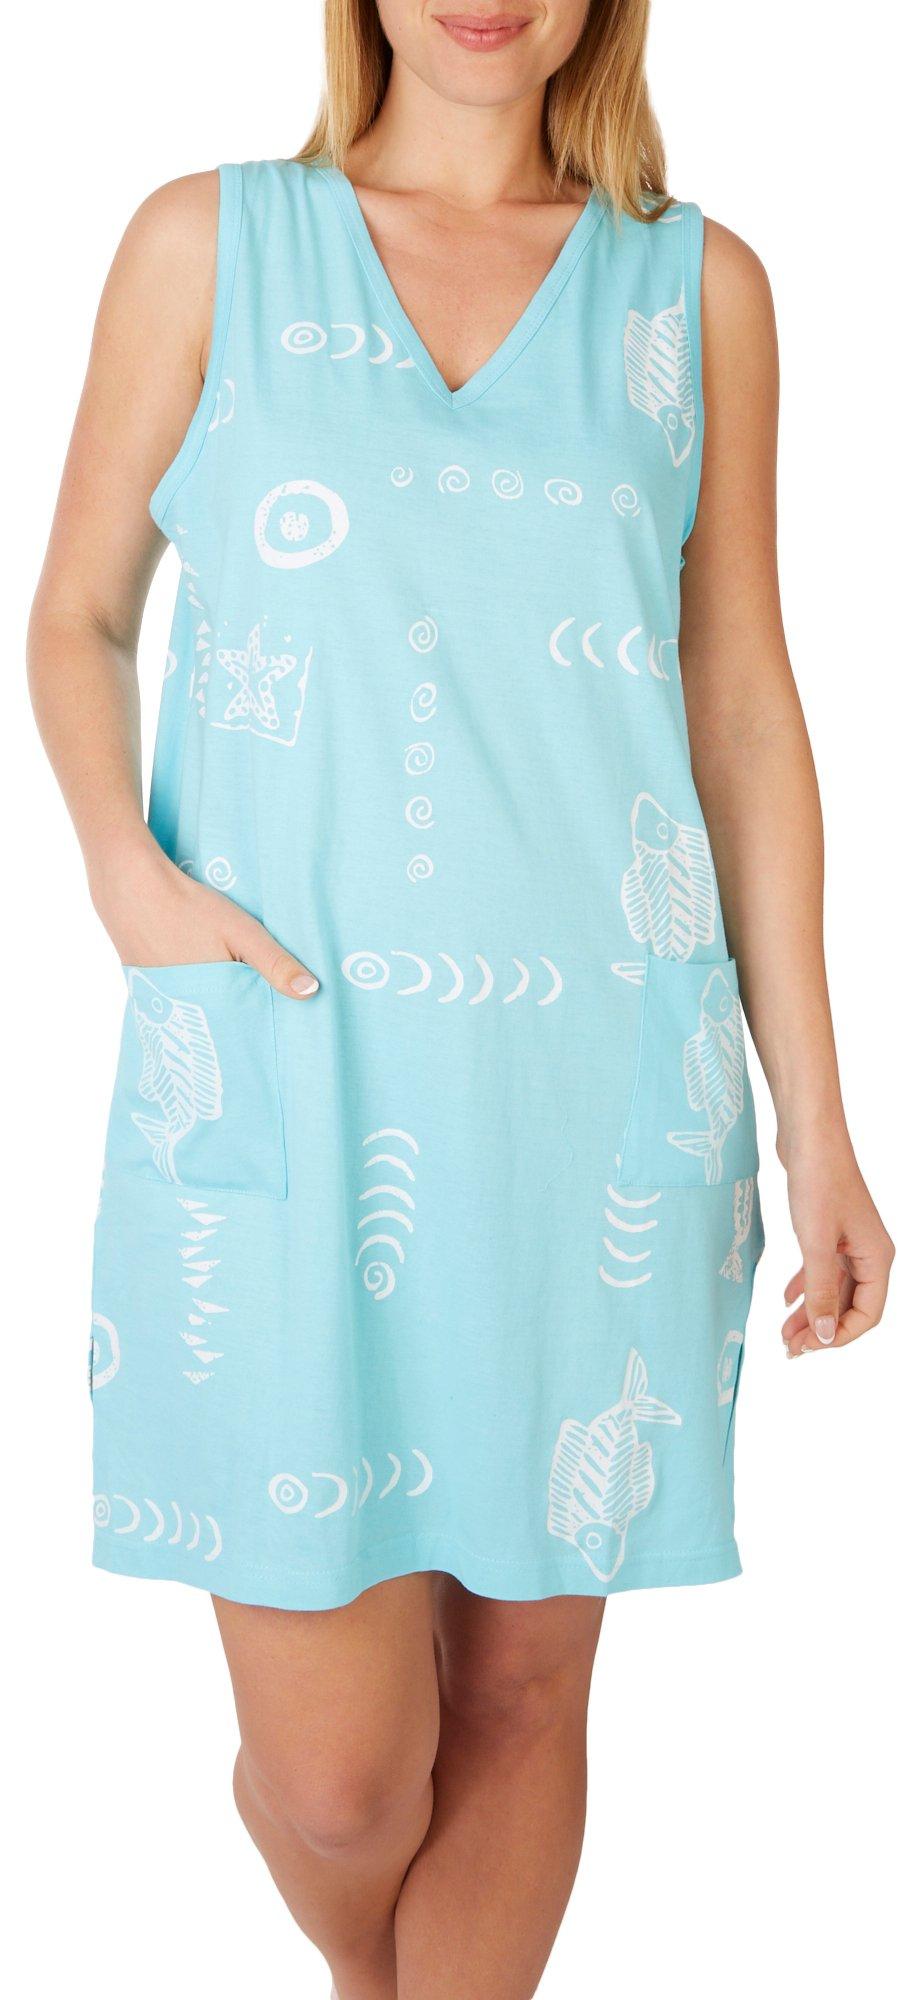 In Gear Womens Fish Print Sleeveless Pocket Coverup